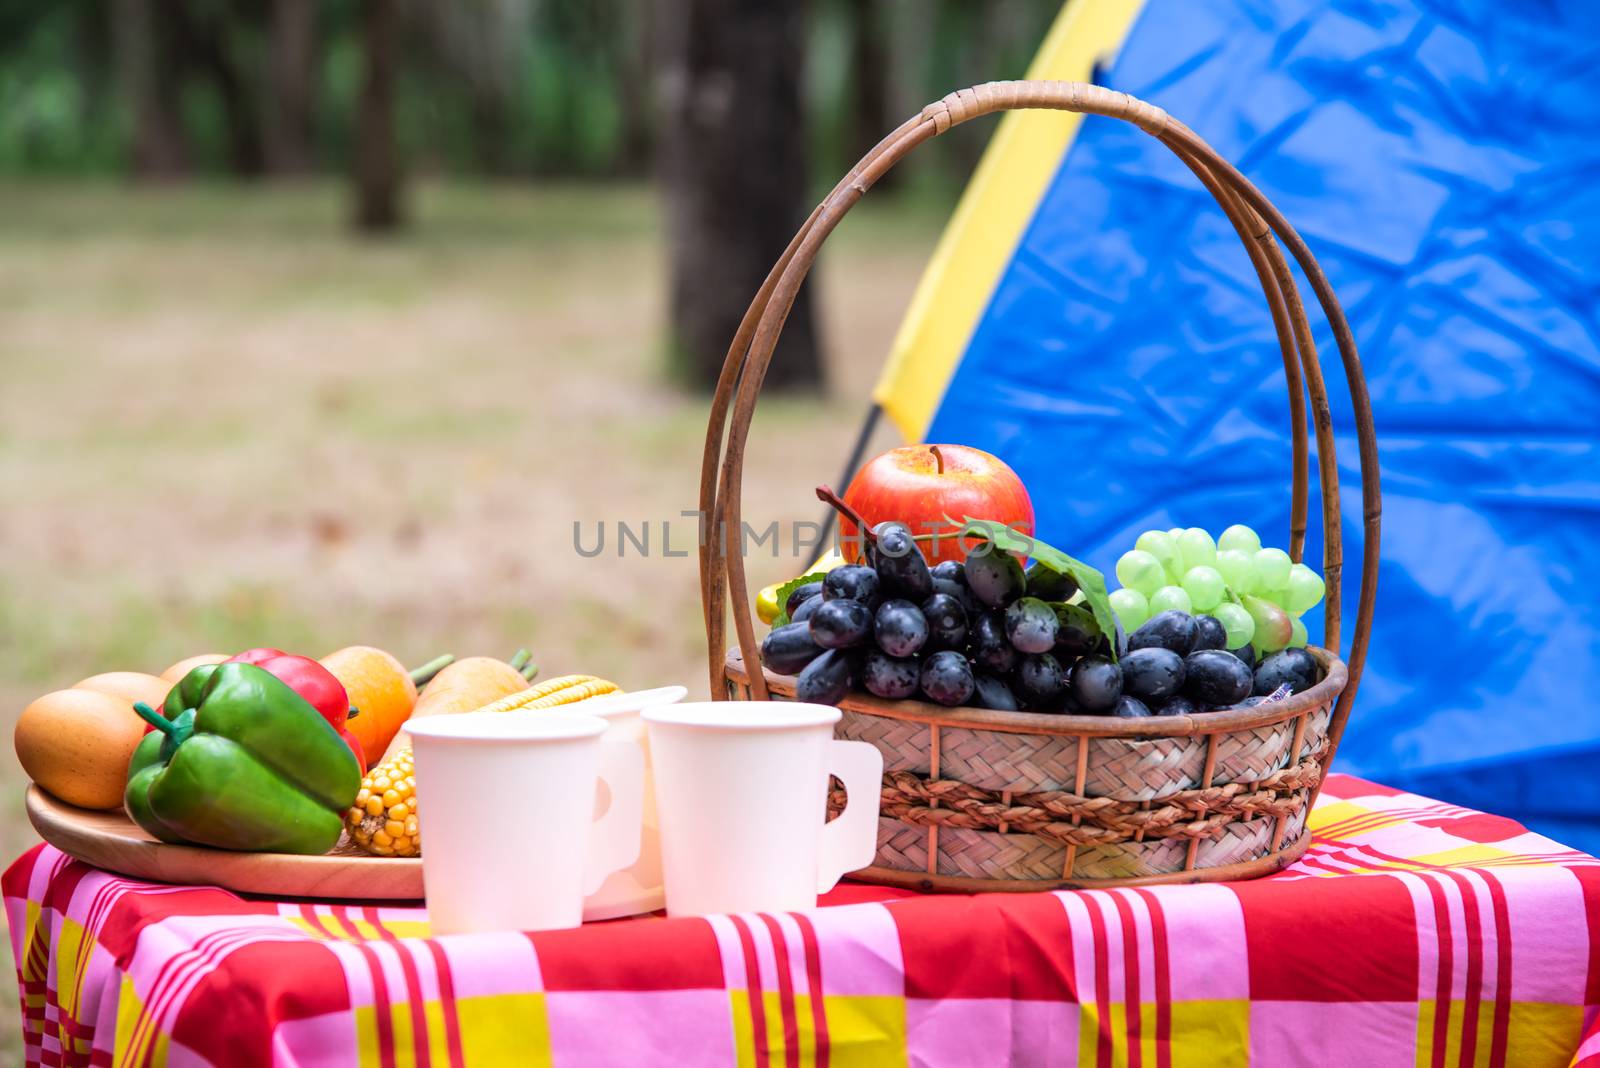 Fruit basket, picnic basketry with food on the table and tent fo by photobyphotoboy